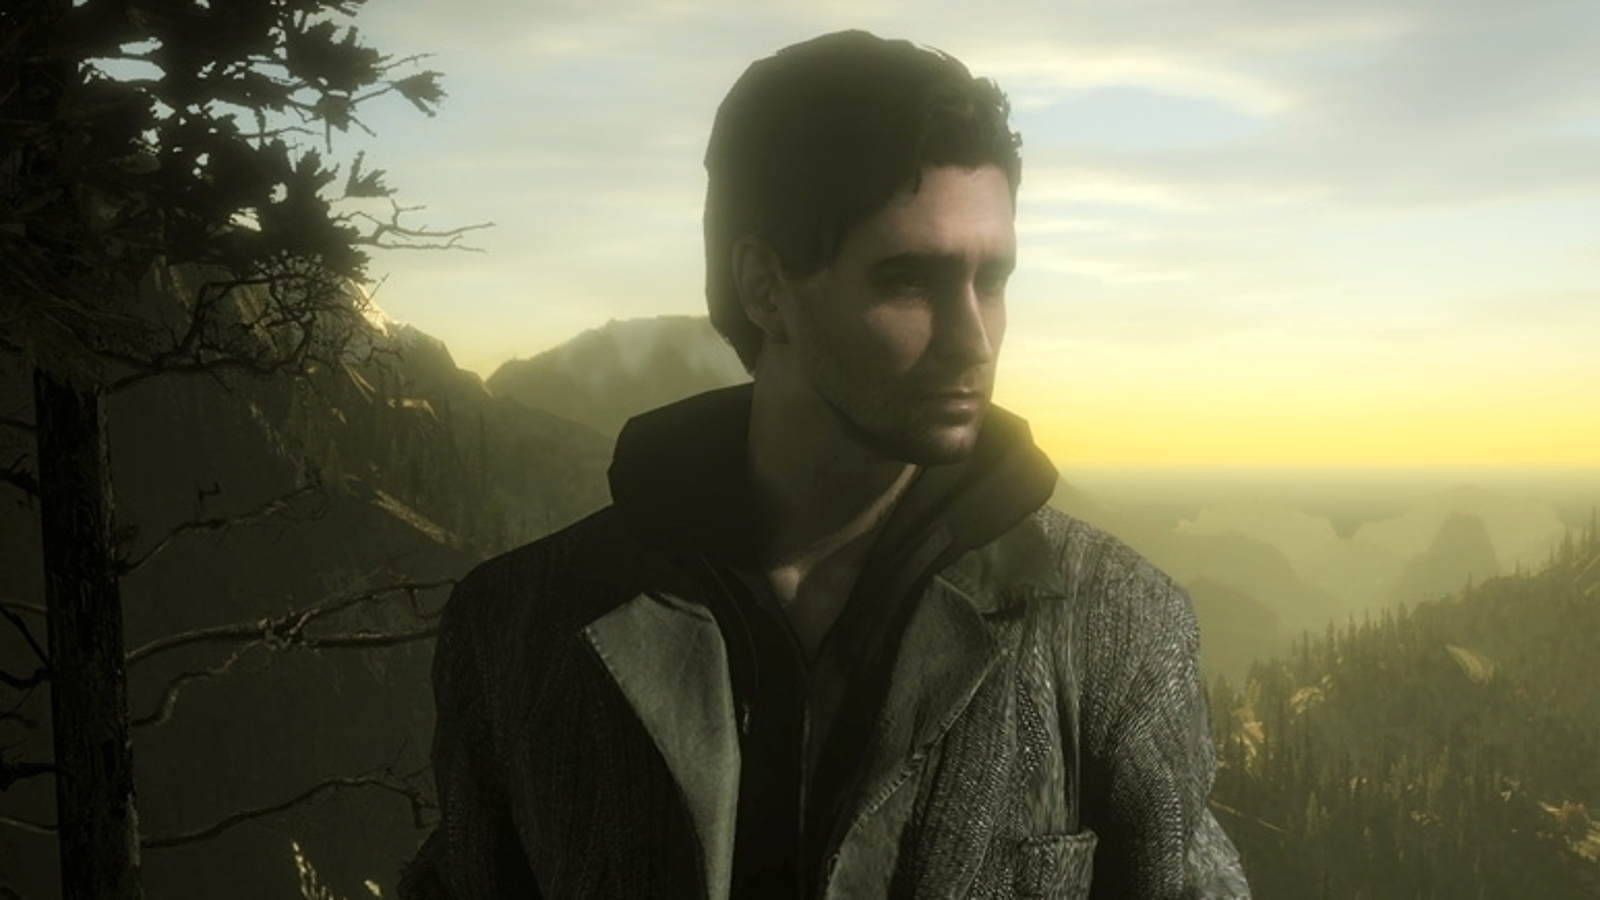 Fresh off Alan Wake 2, Remedy says it's production ready for the Max Payne  1+2 remakes